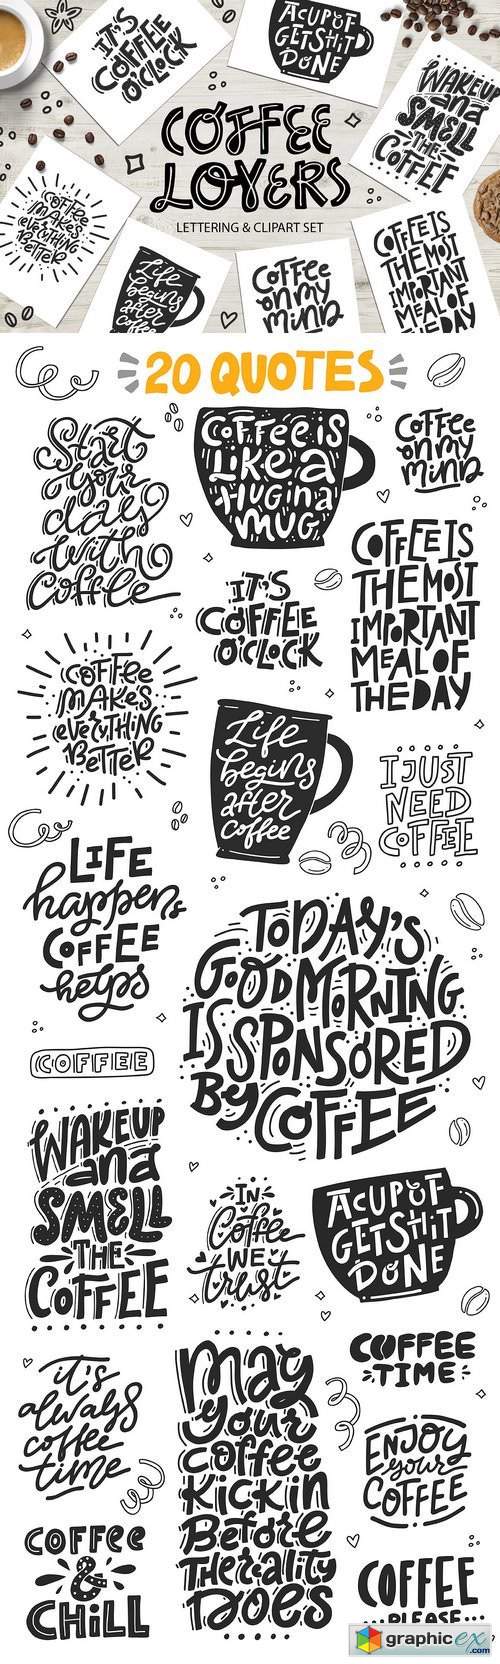 Coffee Lovers - cliart & lettering